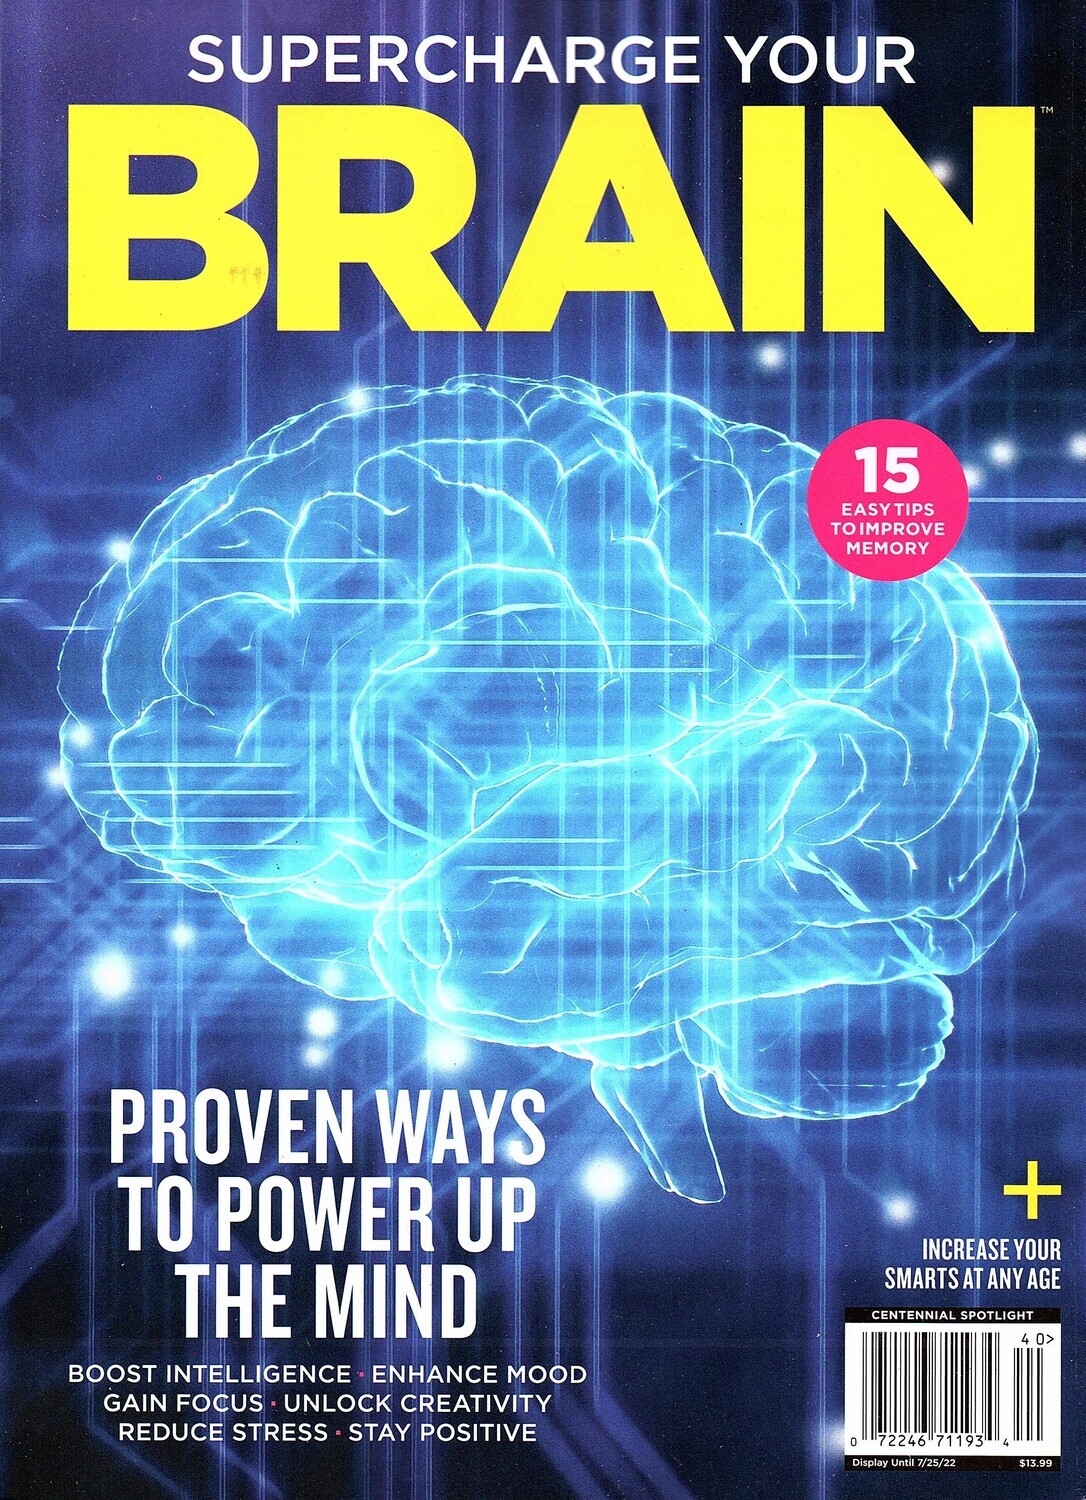 SuperCharge Your Brain - Power Up your Mind